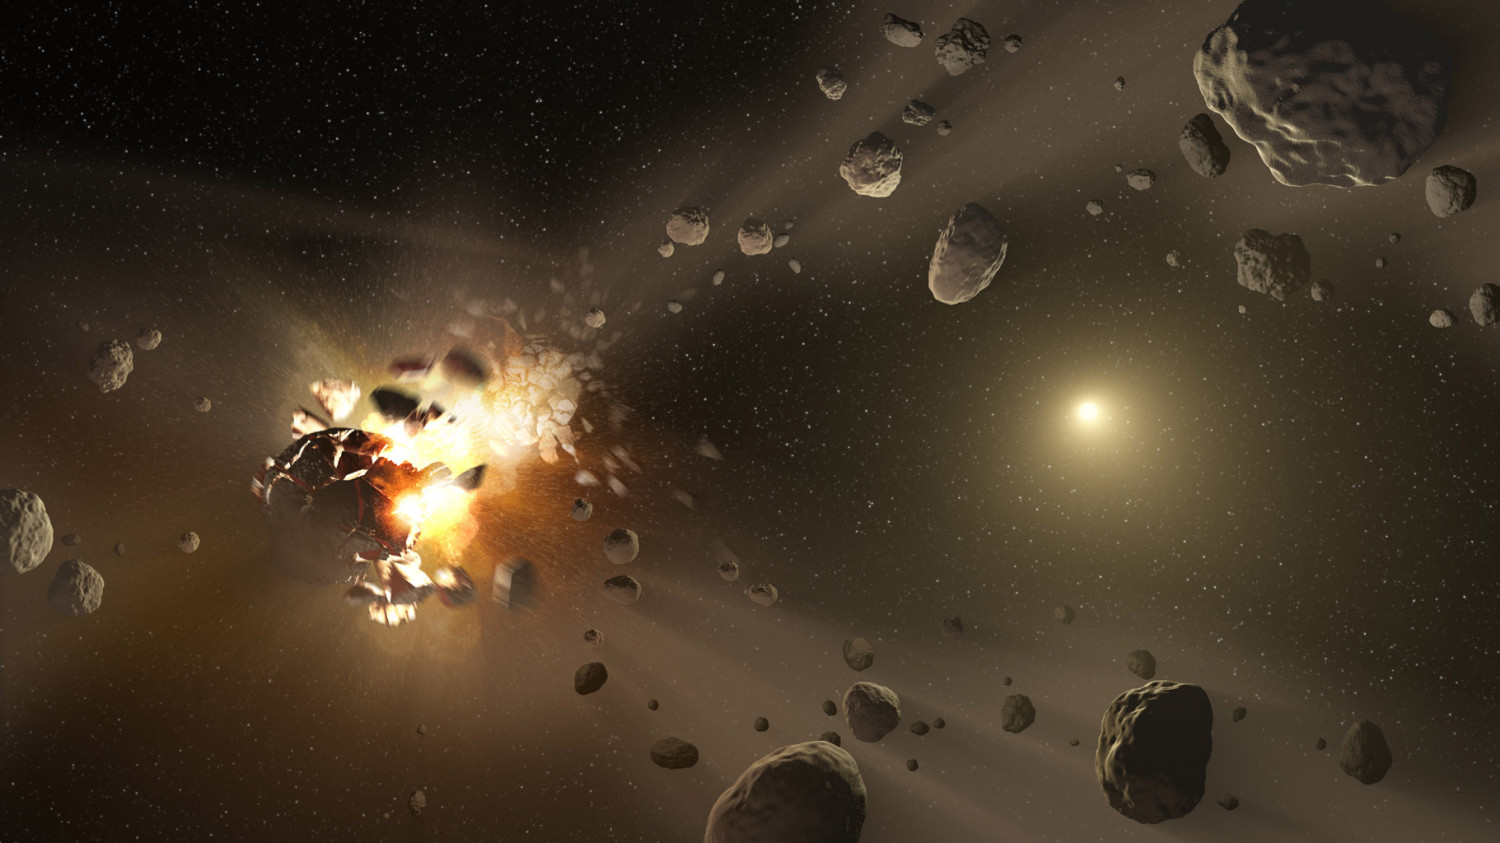 NASA Official Says We Can Expect a Major Asteroid Impact Every 60 Years: ‘This Event Was Not Unique’